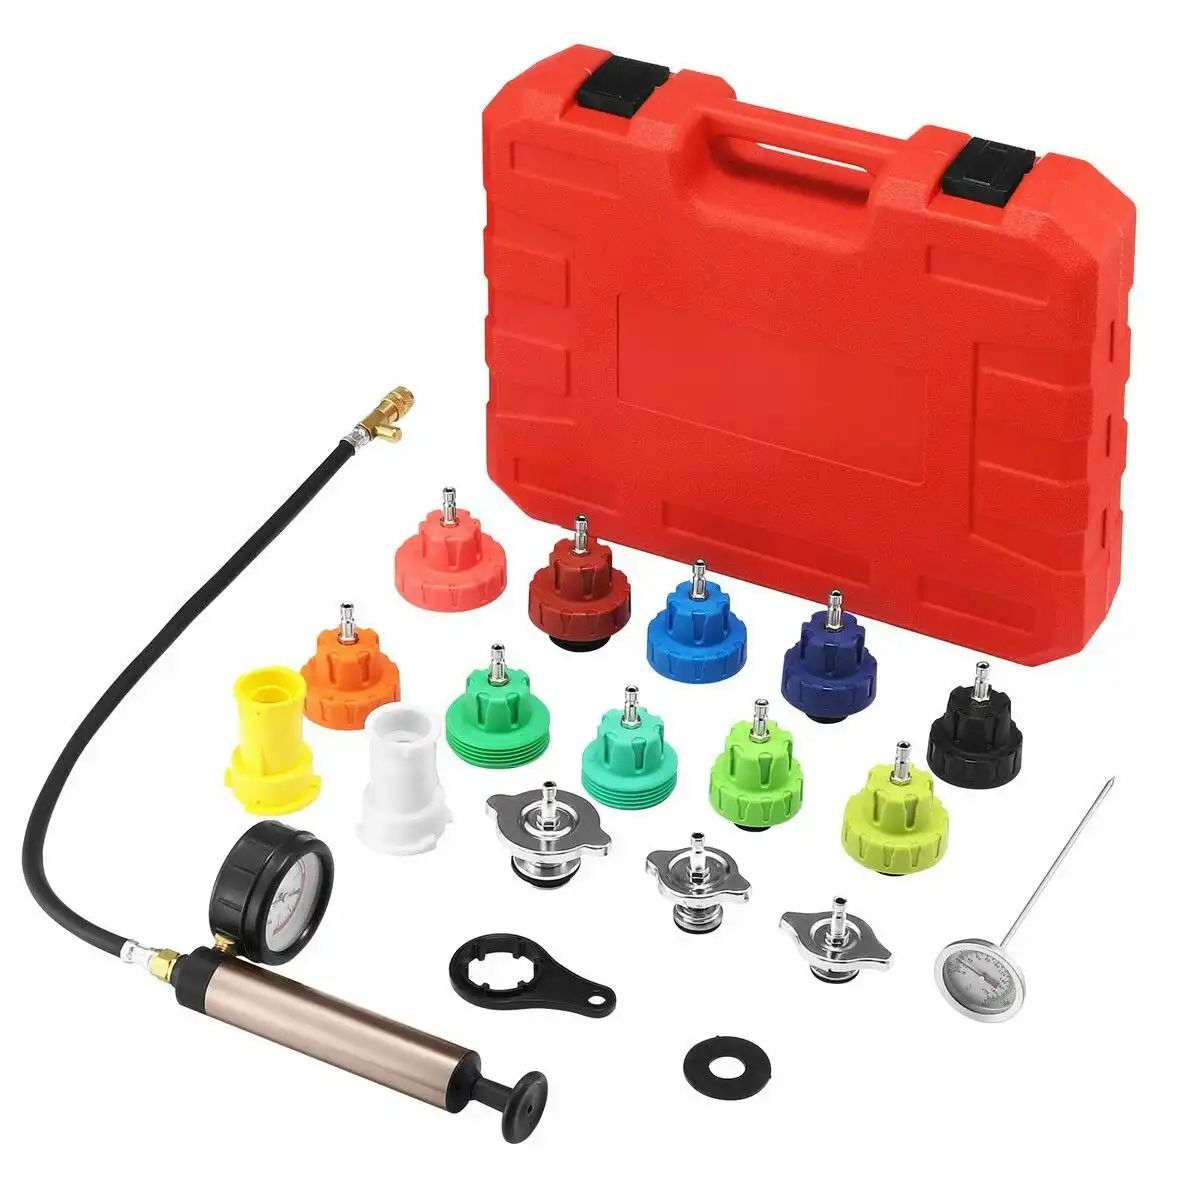 Ausway 18 Piece Radiator Pressure Tester Kit Leak Detector Universal Automotive Coolant Car Cooling System Adapter Toolbox